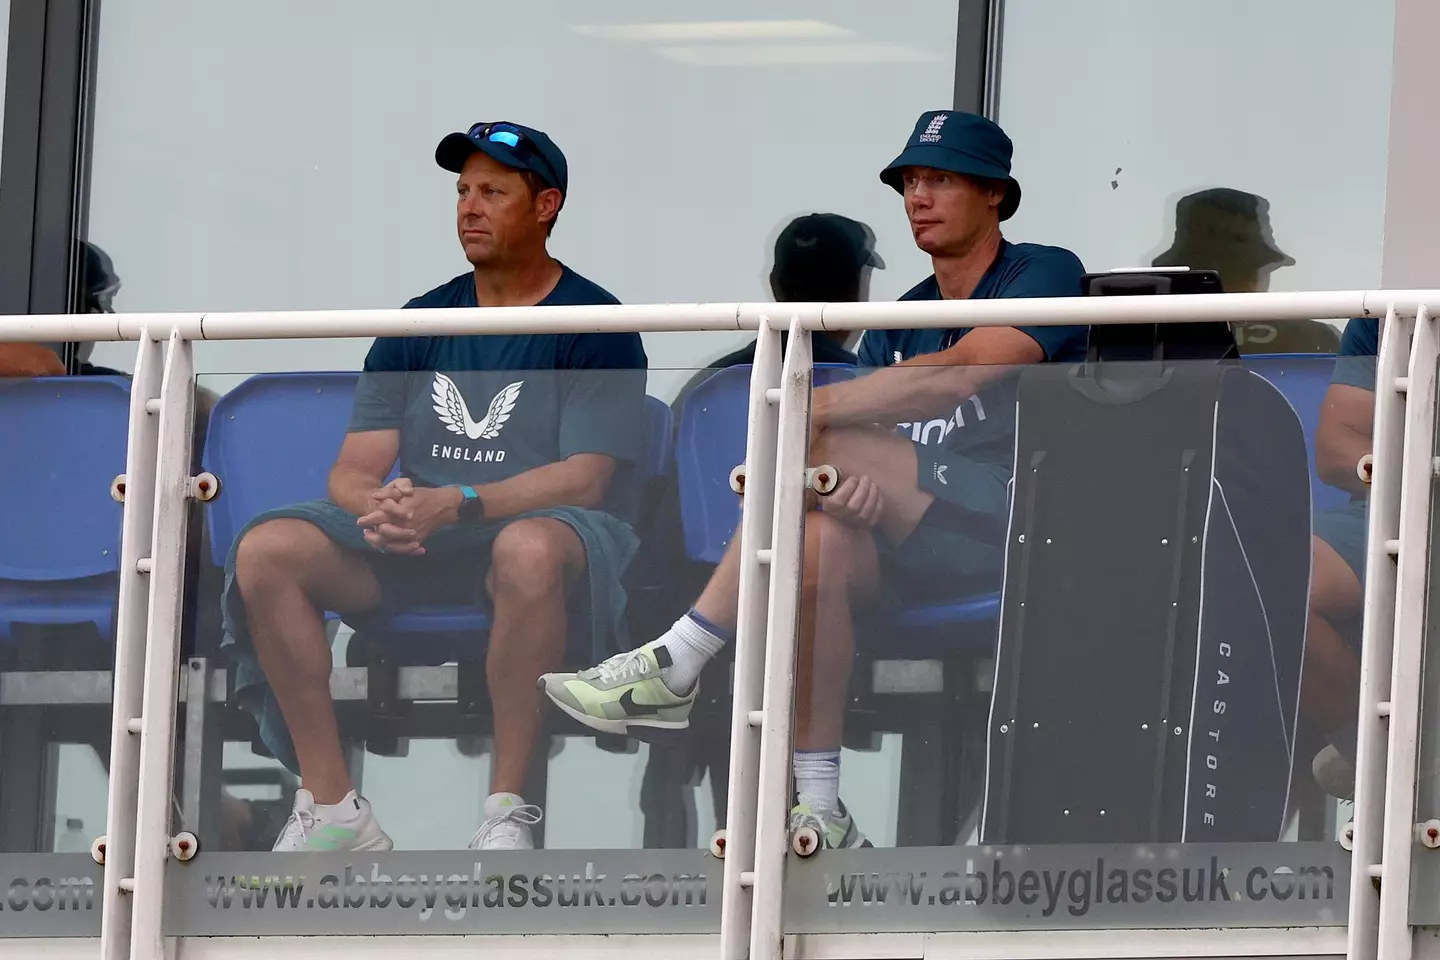 Freddie Flintoff watched England and New Zealand play cricket in Cardiff on Friday (8 September).